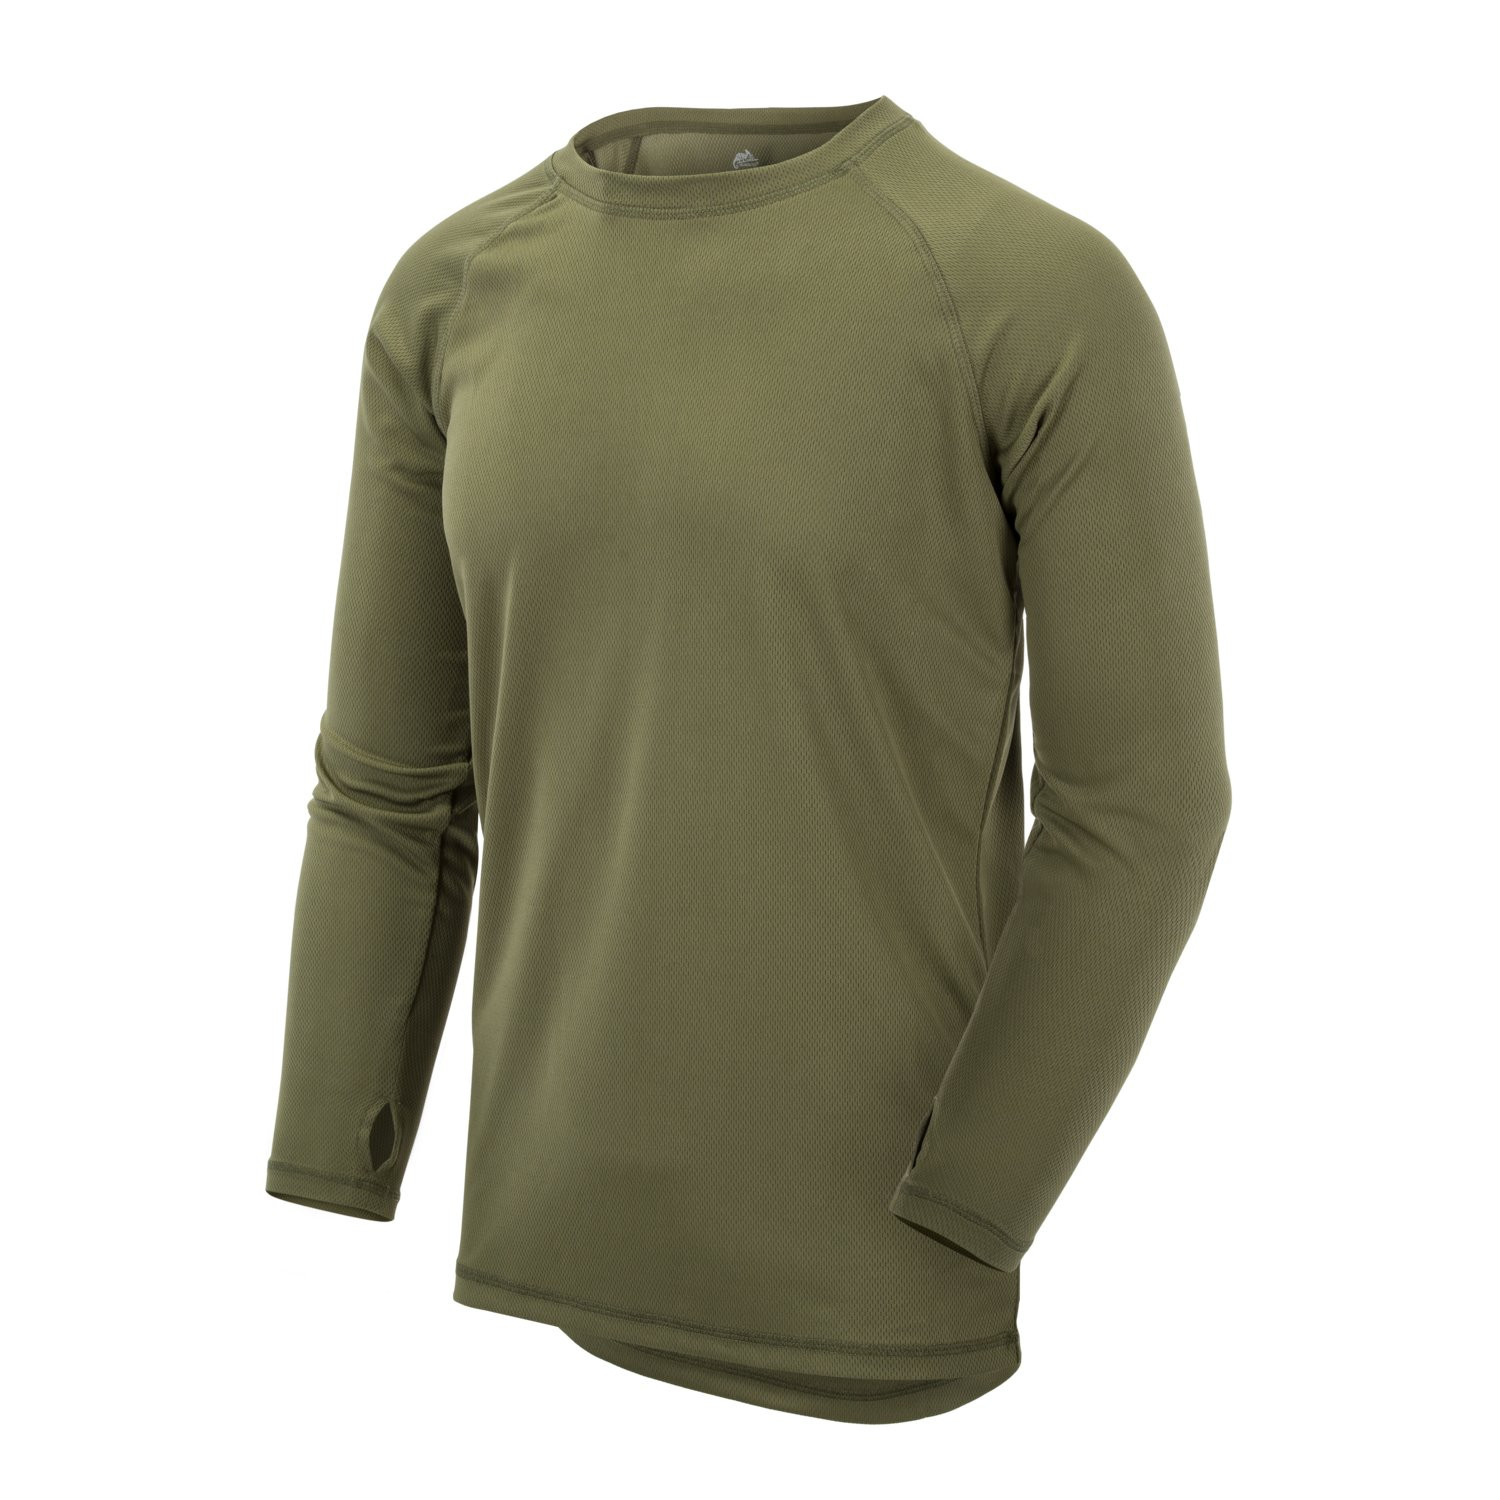 Helikon-Tex UNDERWEAR US Level 2 LVL Army Military Tactical Thermal FULL SET